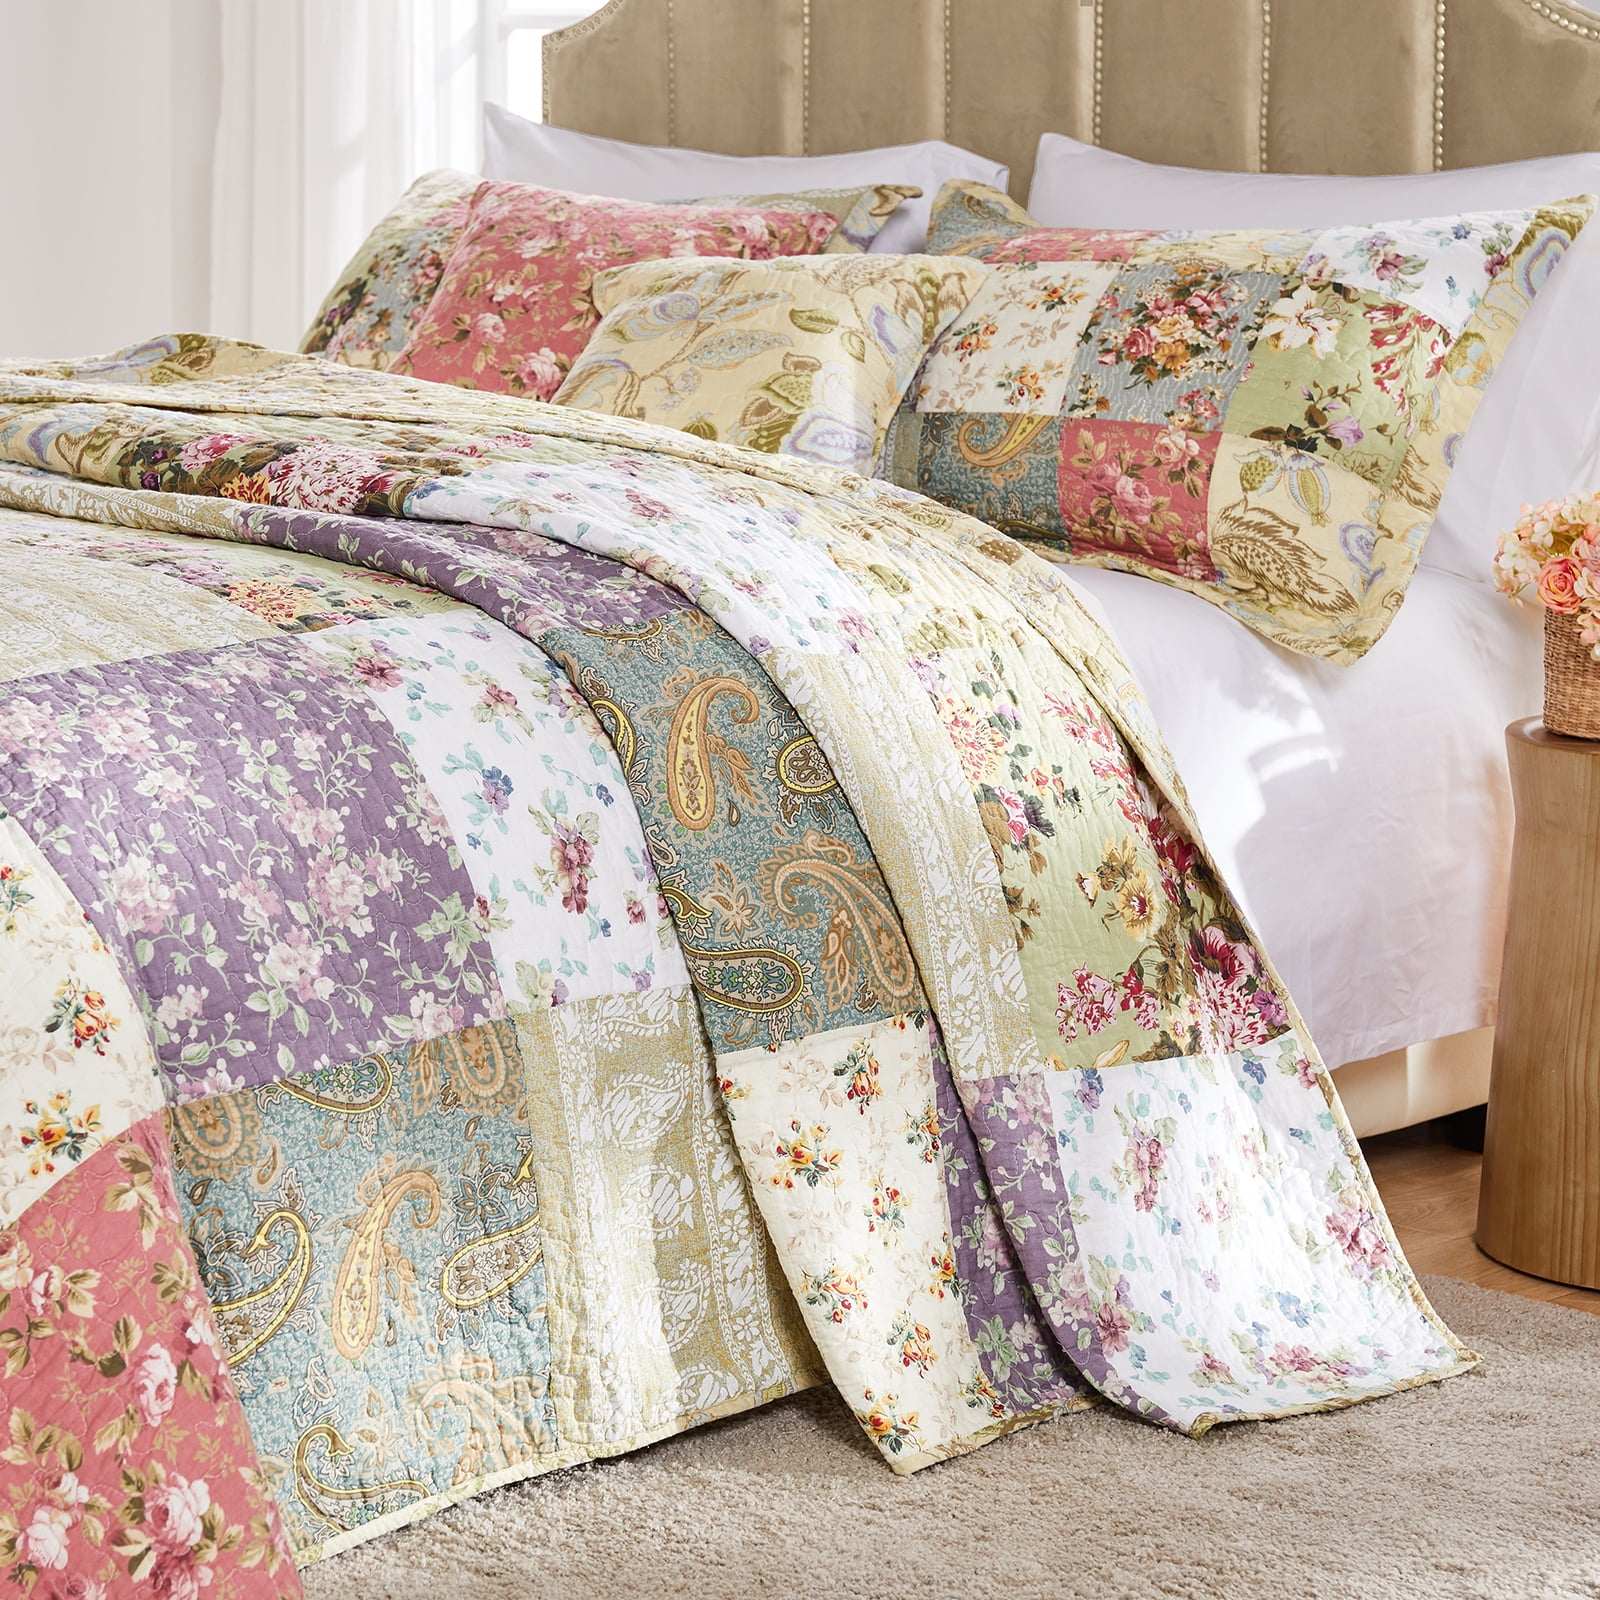 Details about   Retro Quilted Bedspread & Pillow Shams Set Circles Spots Colorful Print 